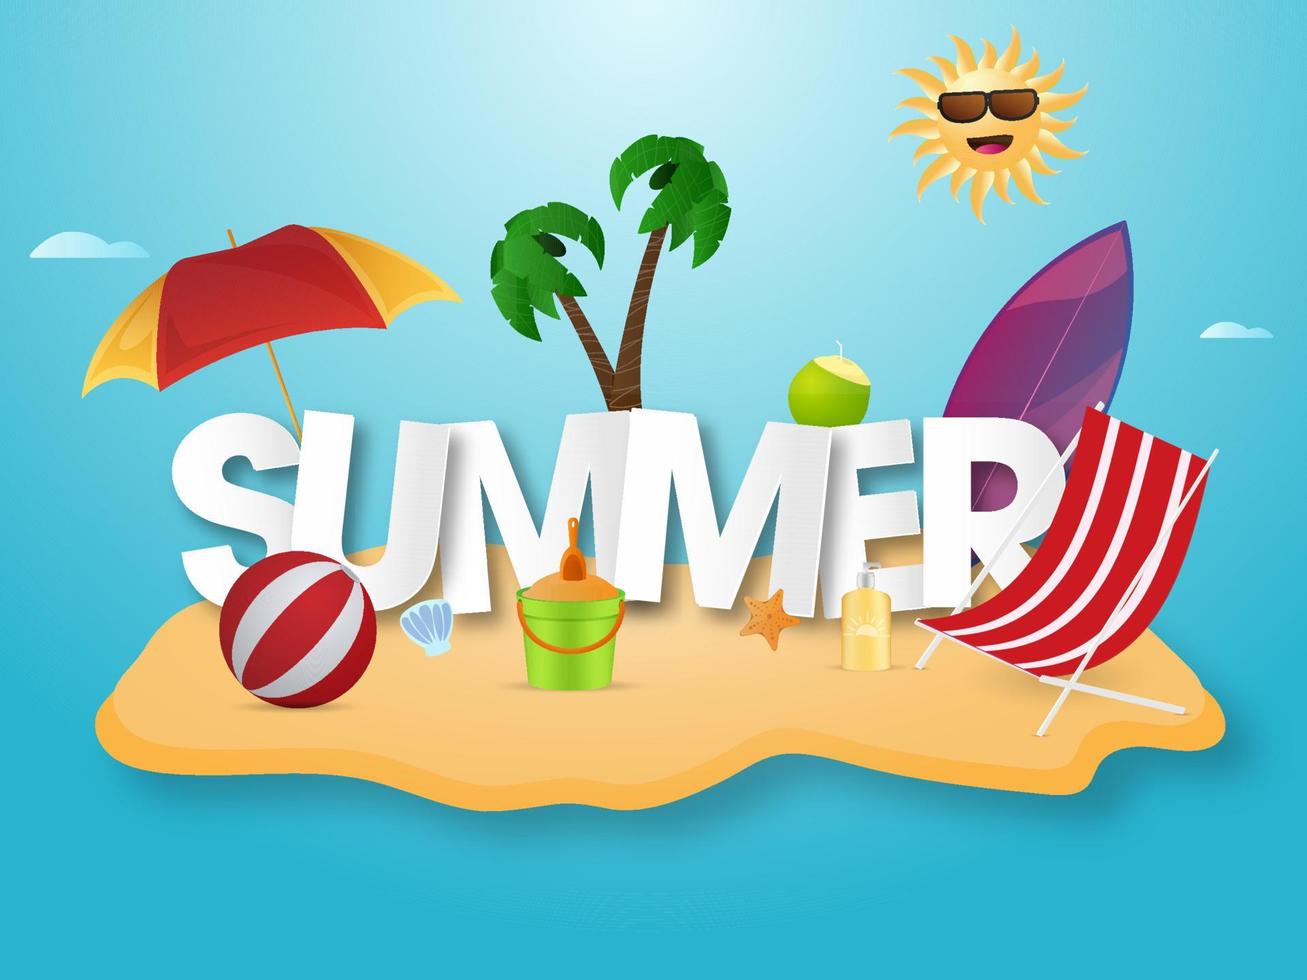 Paper Cut Summer Text with Cartoon Funny Sun and Beach Elements on Abstract Sand and Blue Background. vector